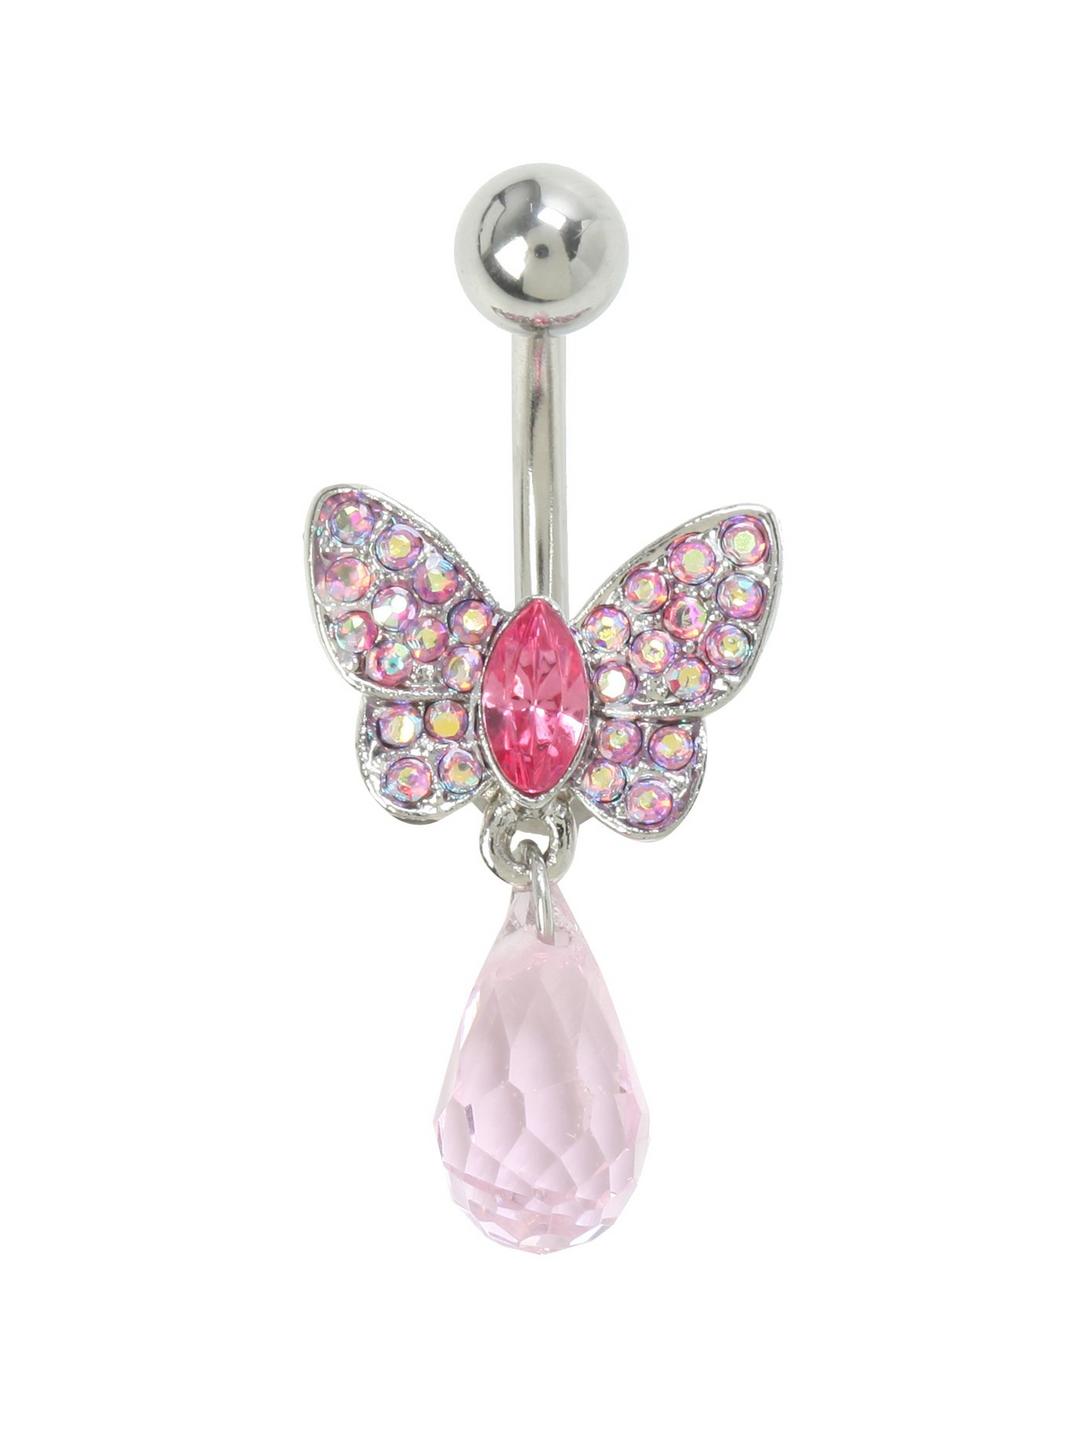 14G Steel Pink CZ Butterfly Navel Barbell, , hi-res